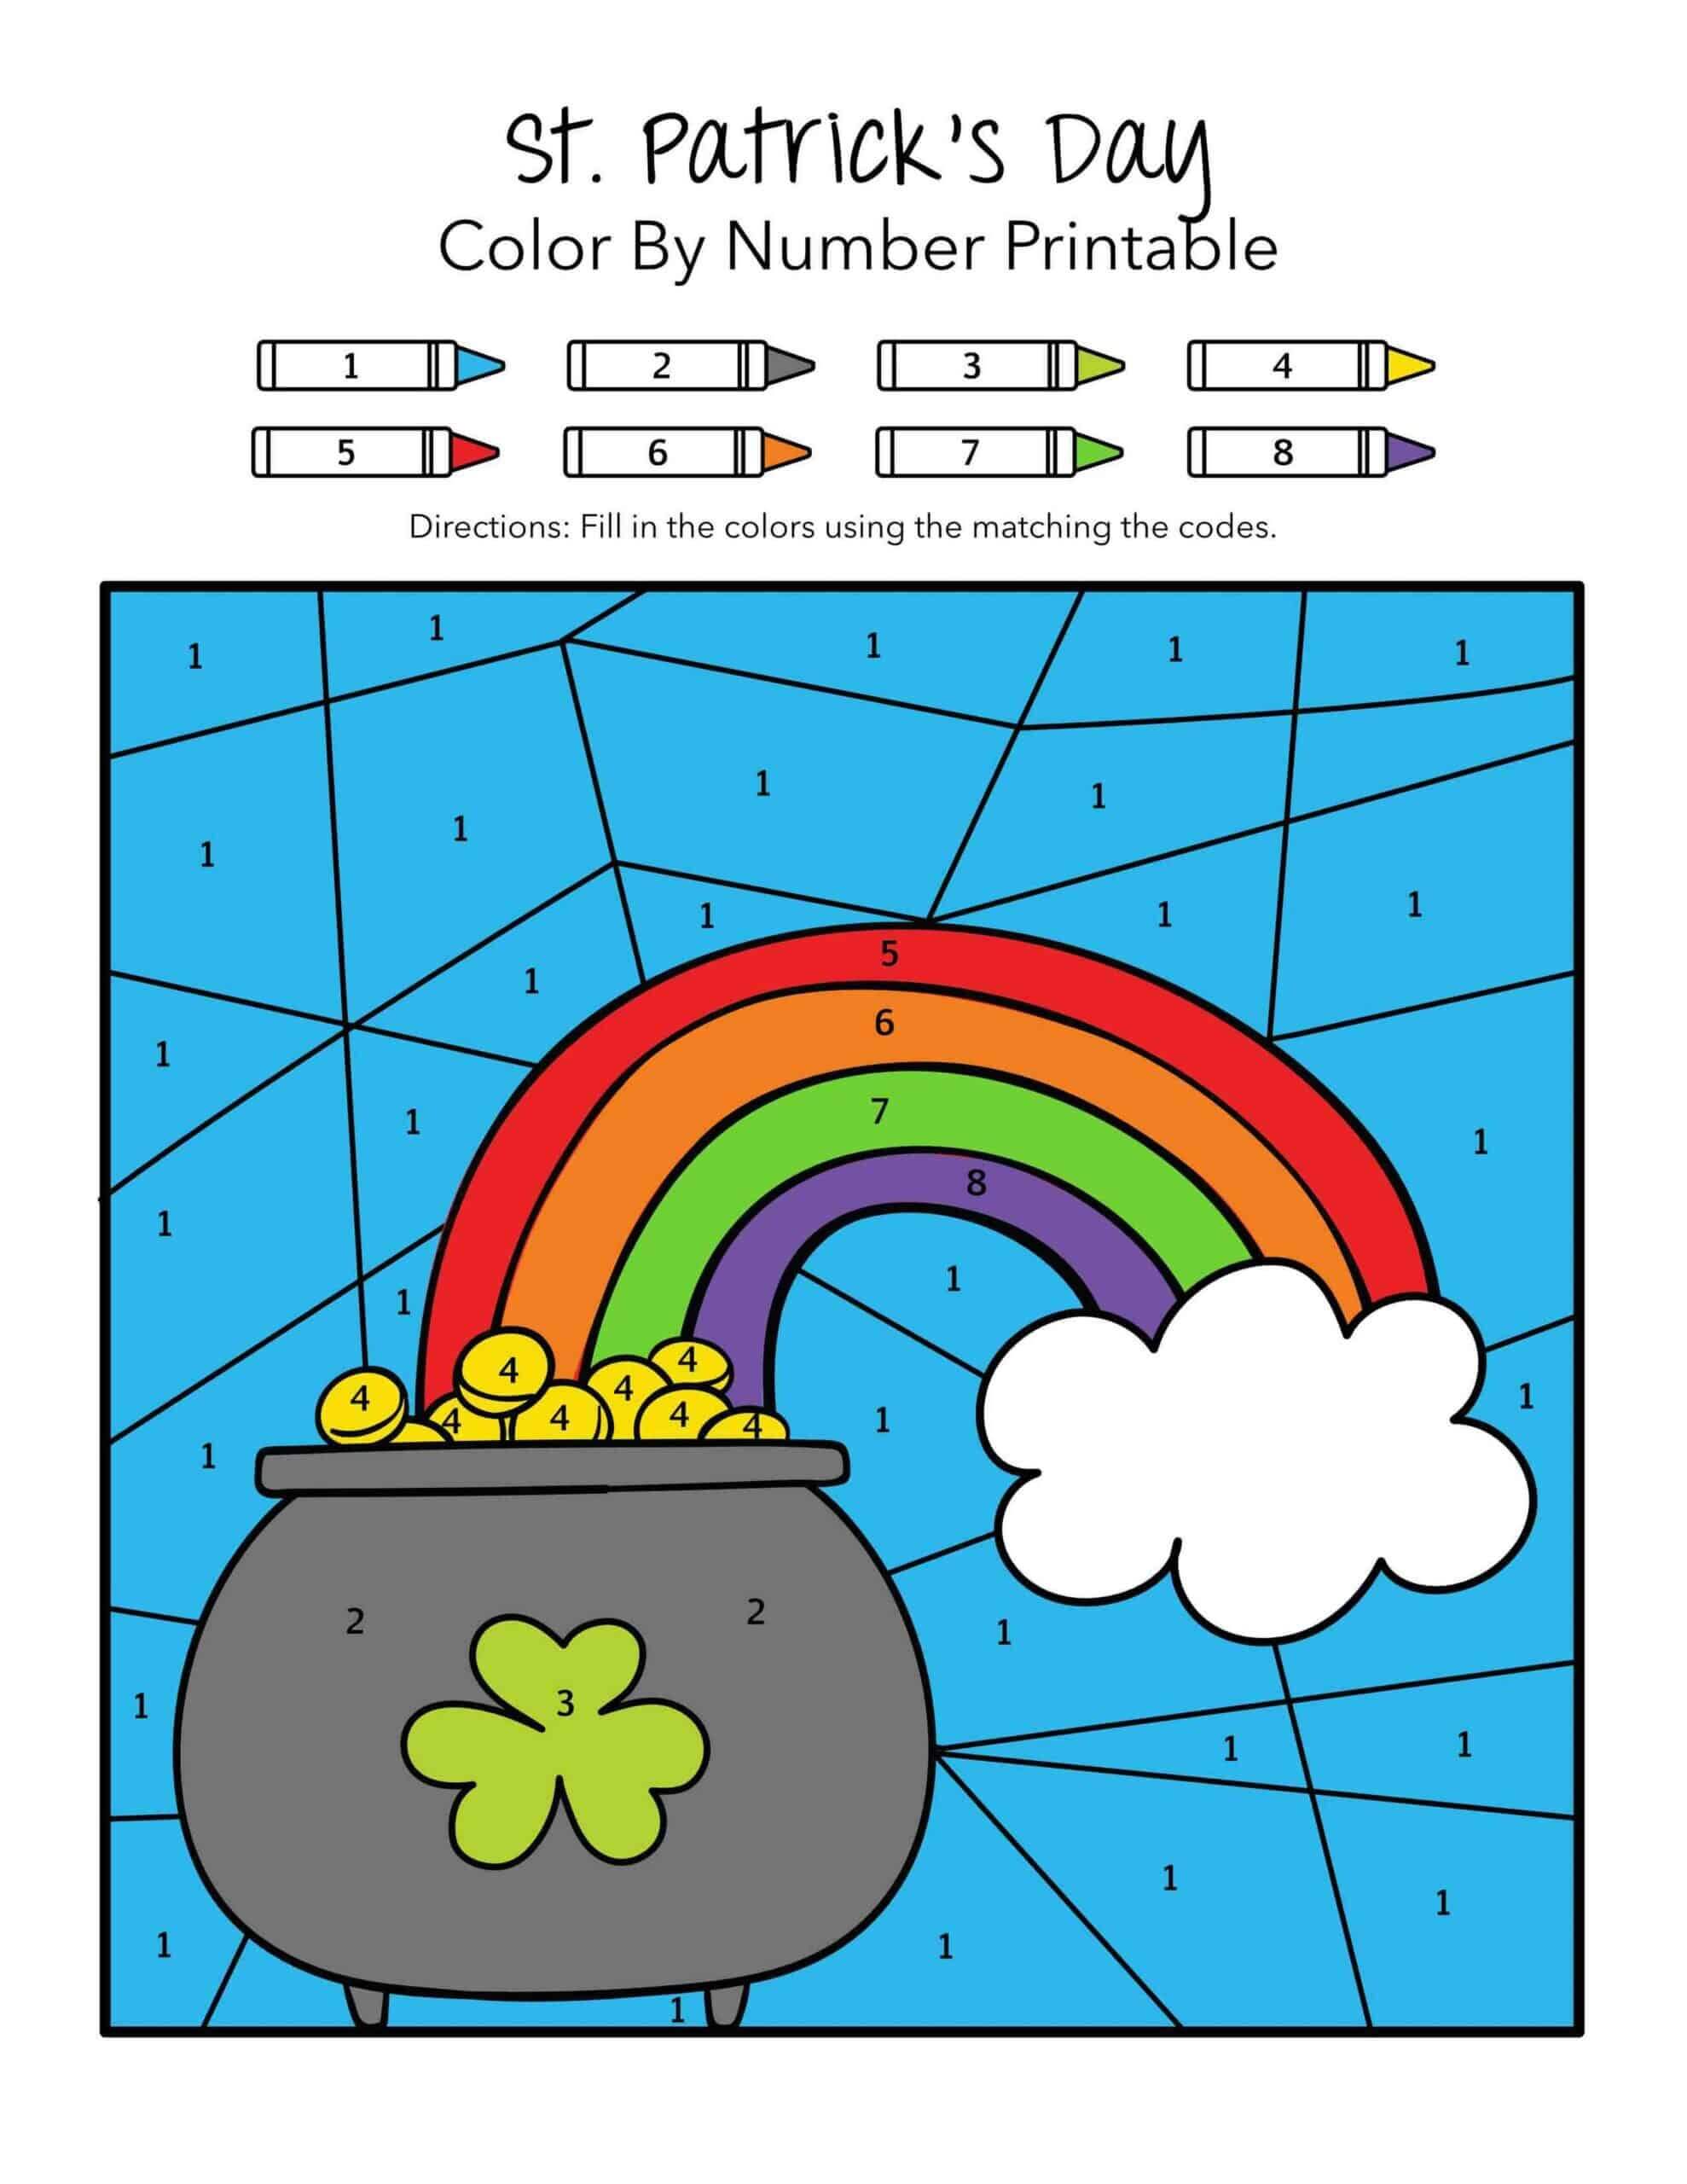 Money Jar With Rainbow From St Patrick's Day Color By Number